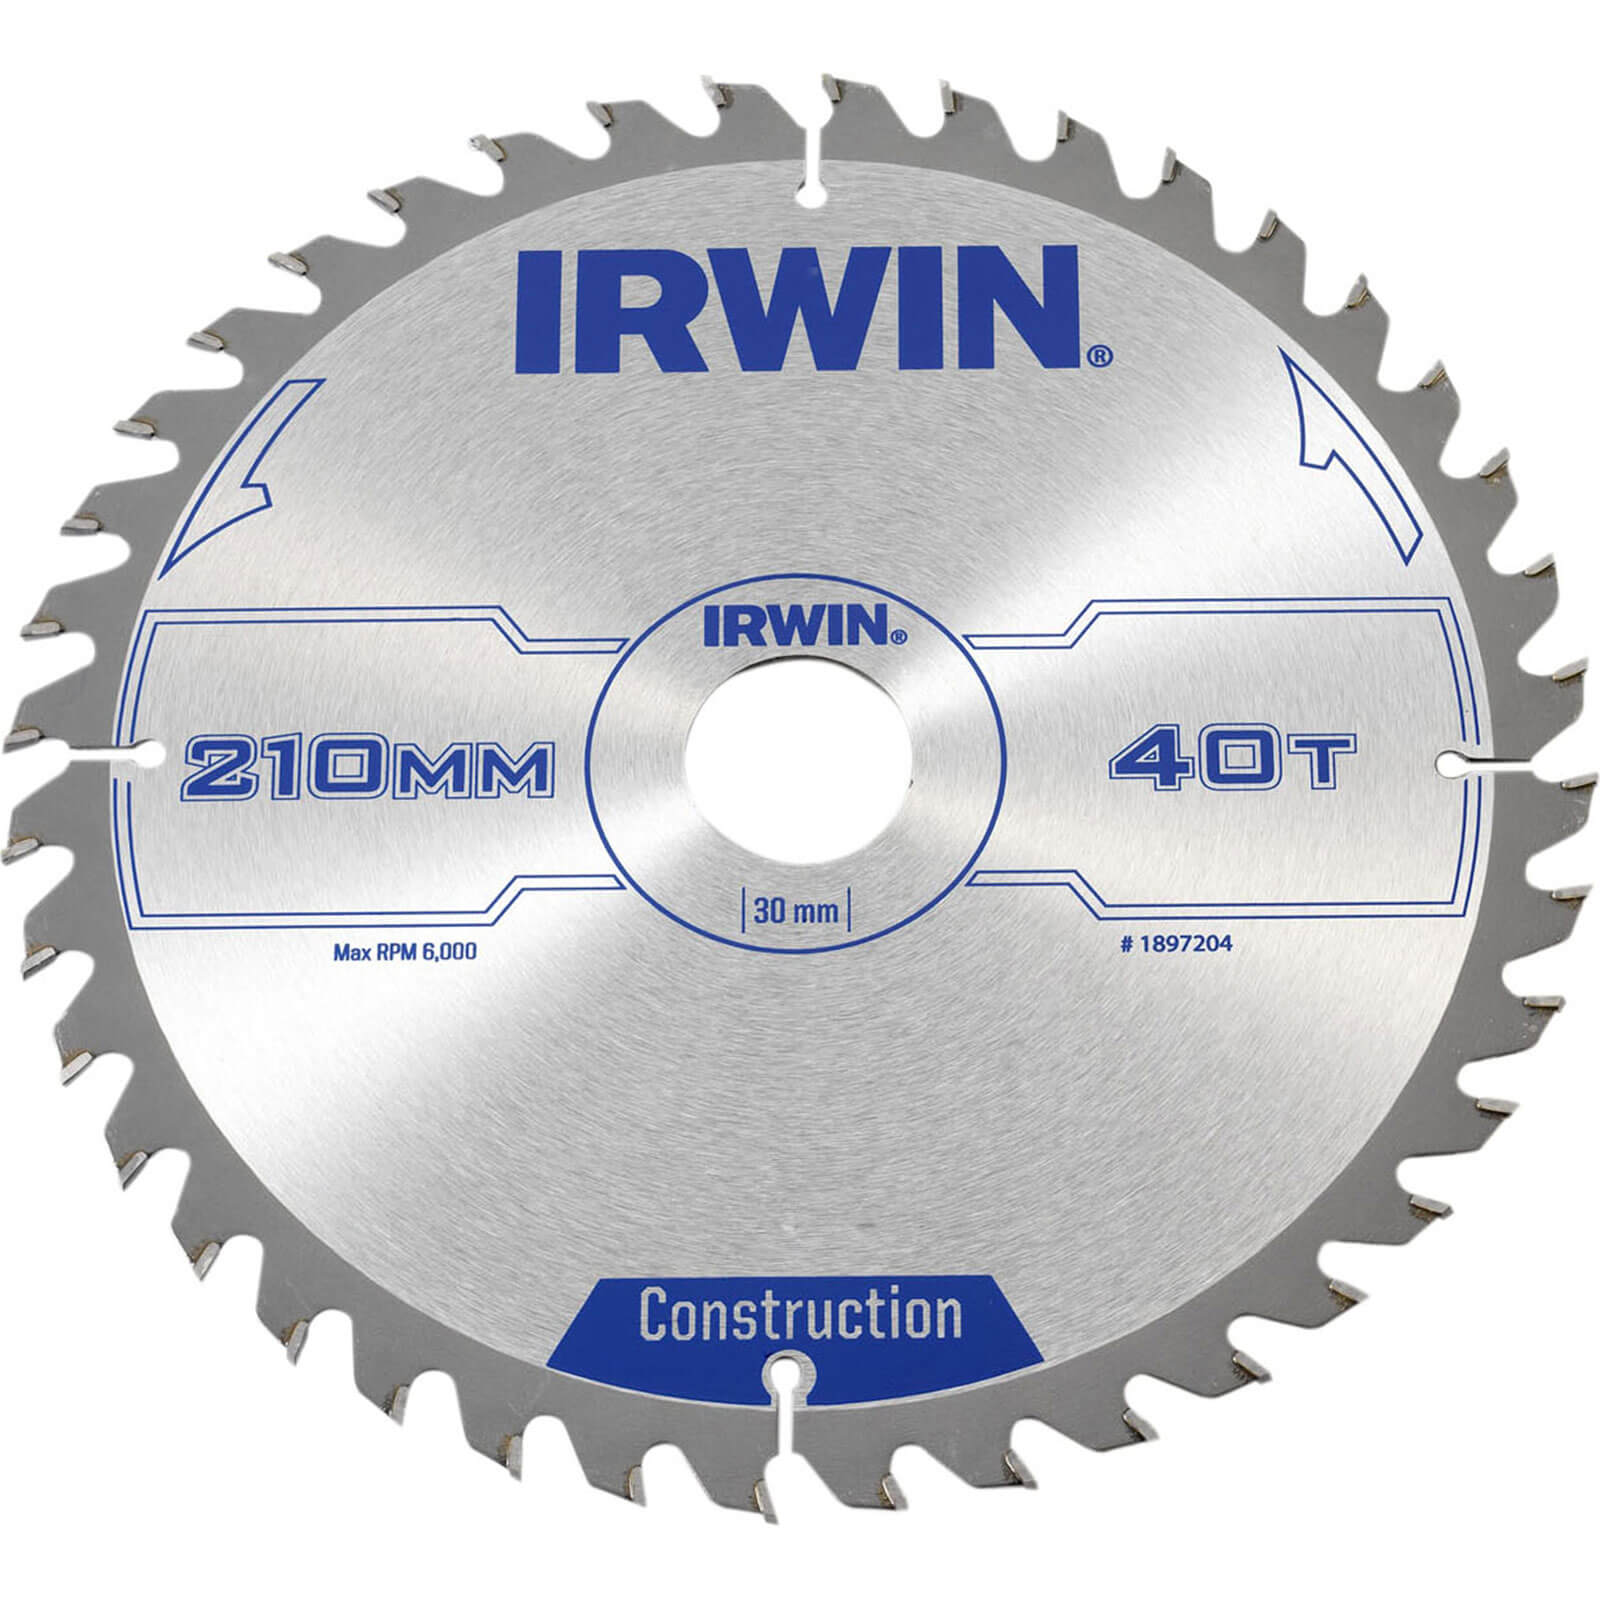 Photo of Irwin Atb Construction Circular Saw Blade 210mm 40t 30mm